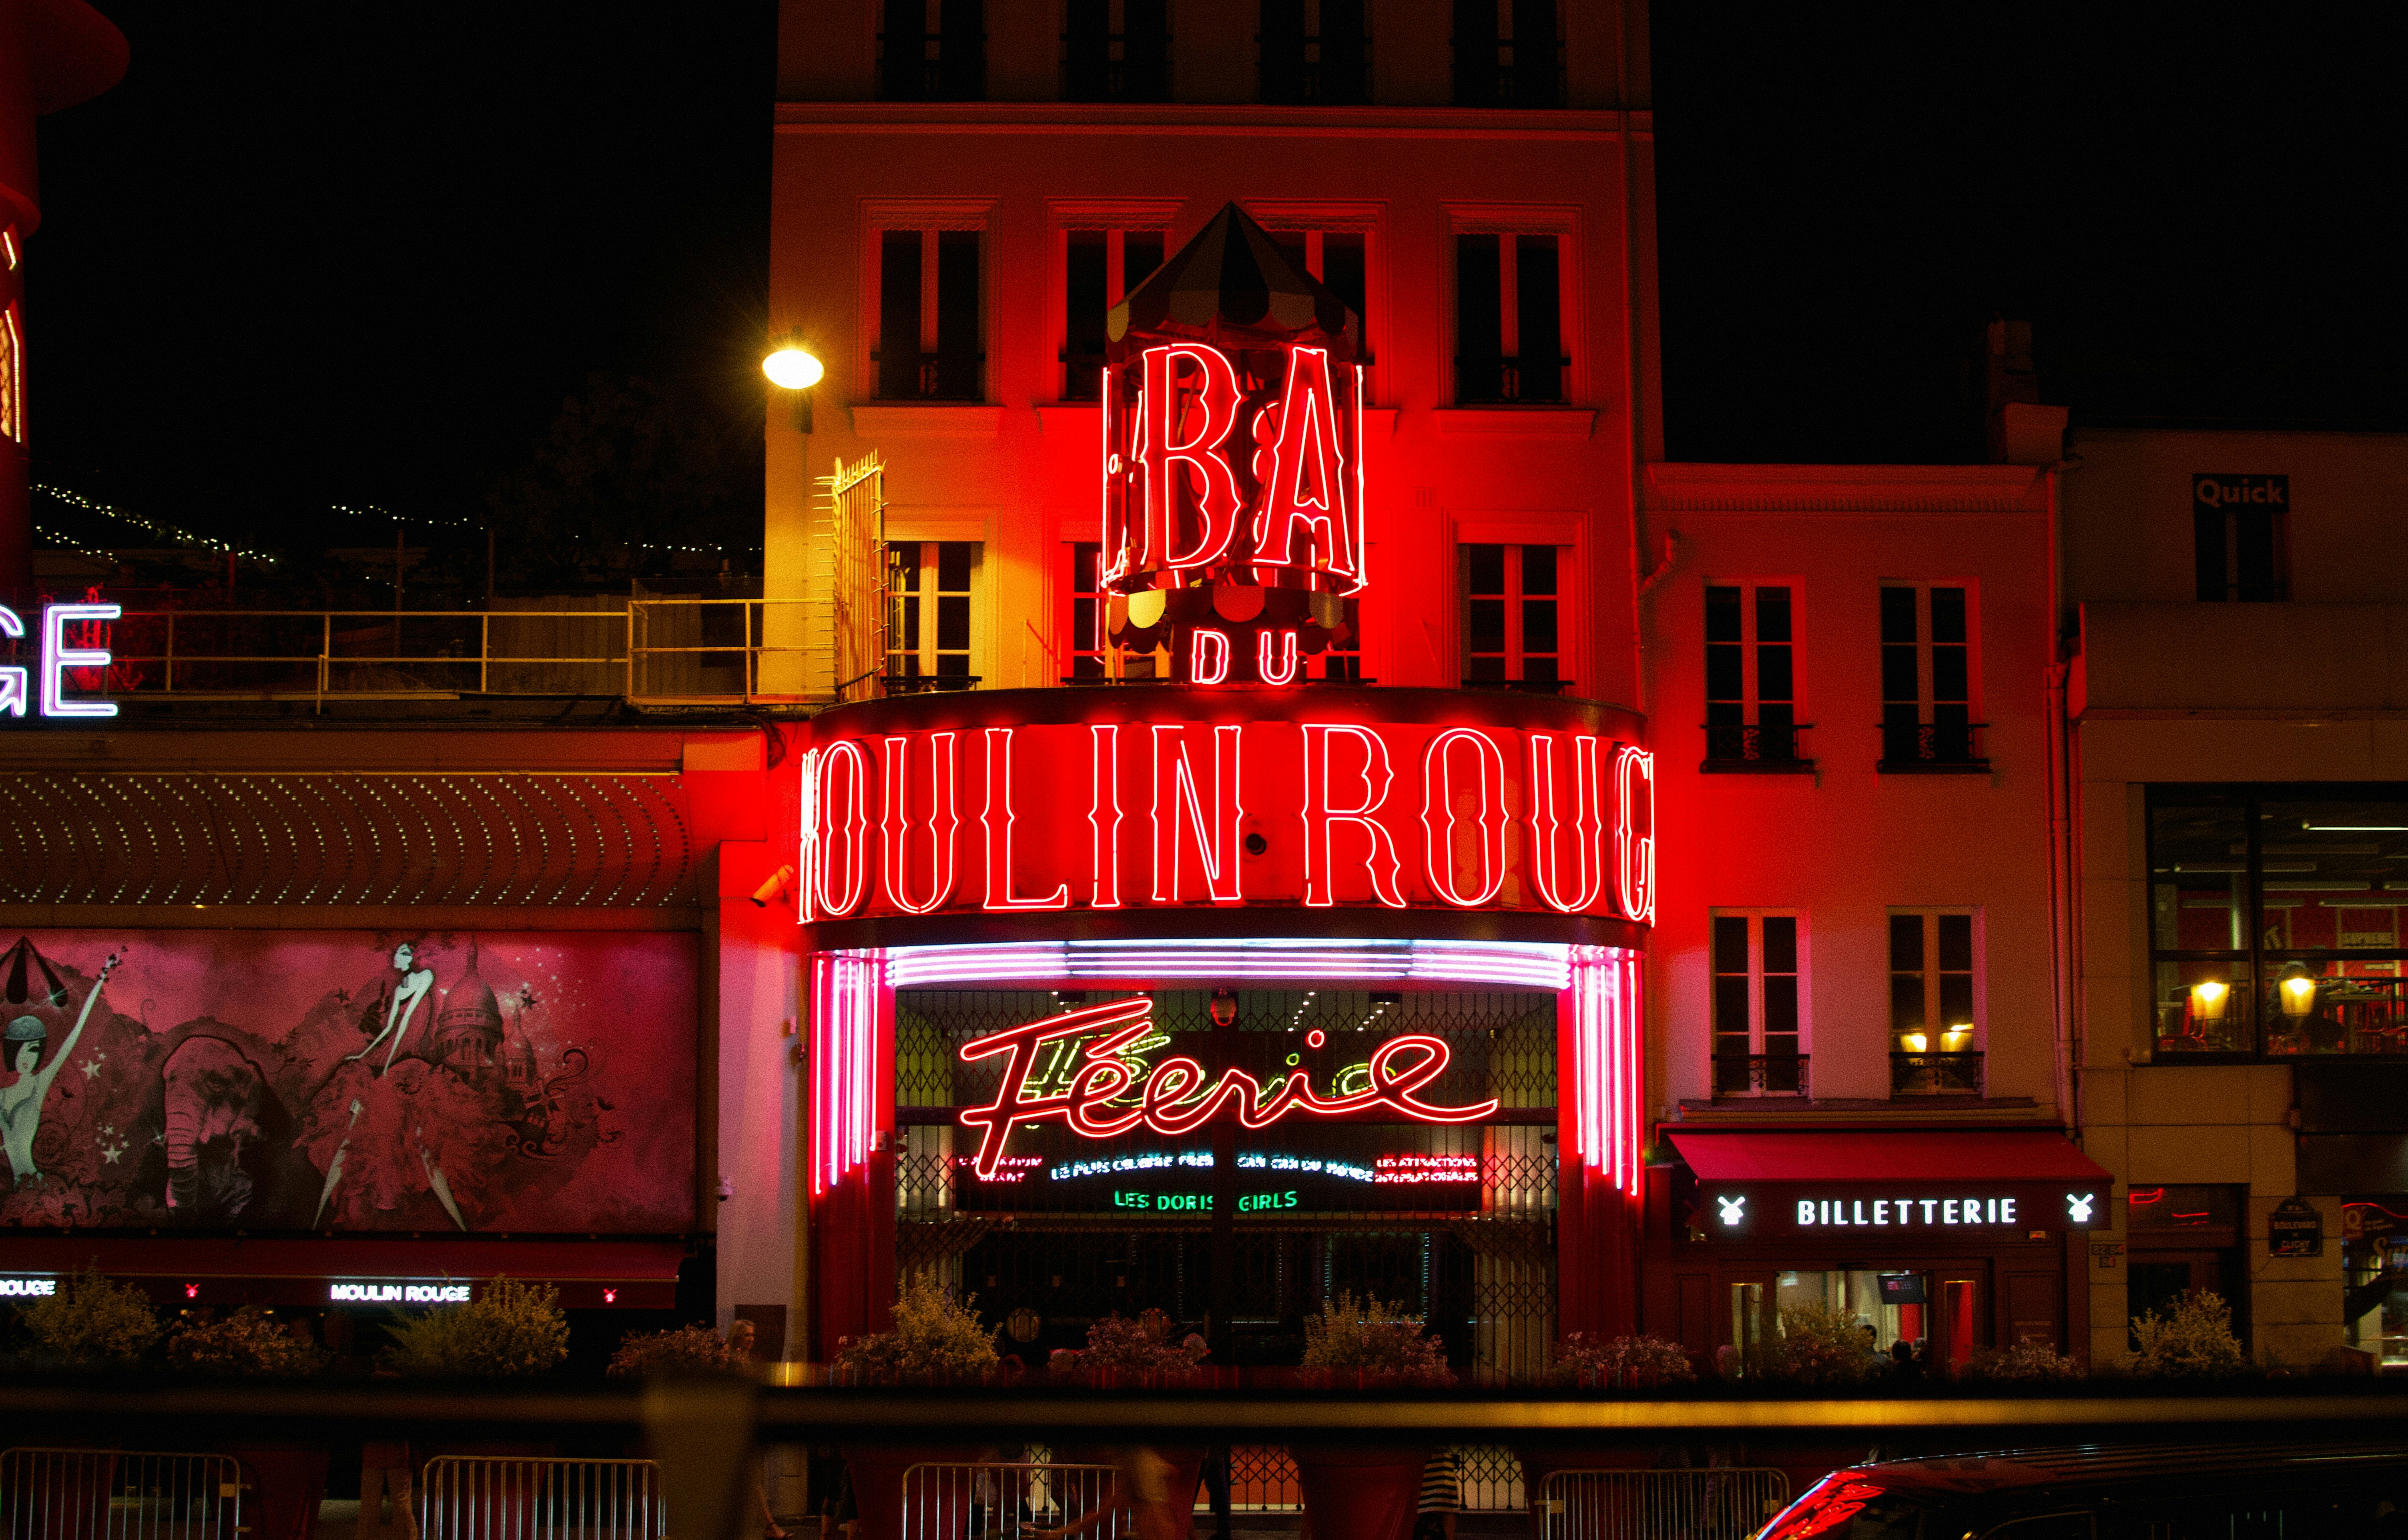 The iconic Moulin Rouge.